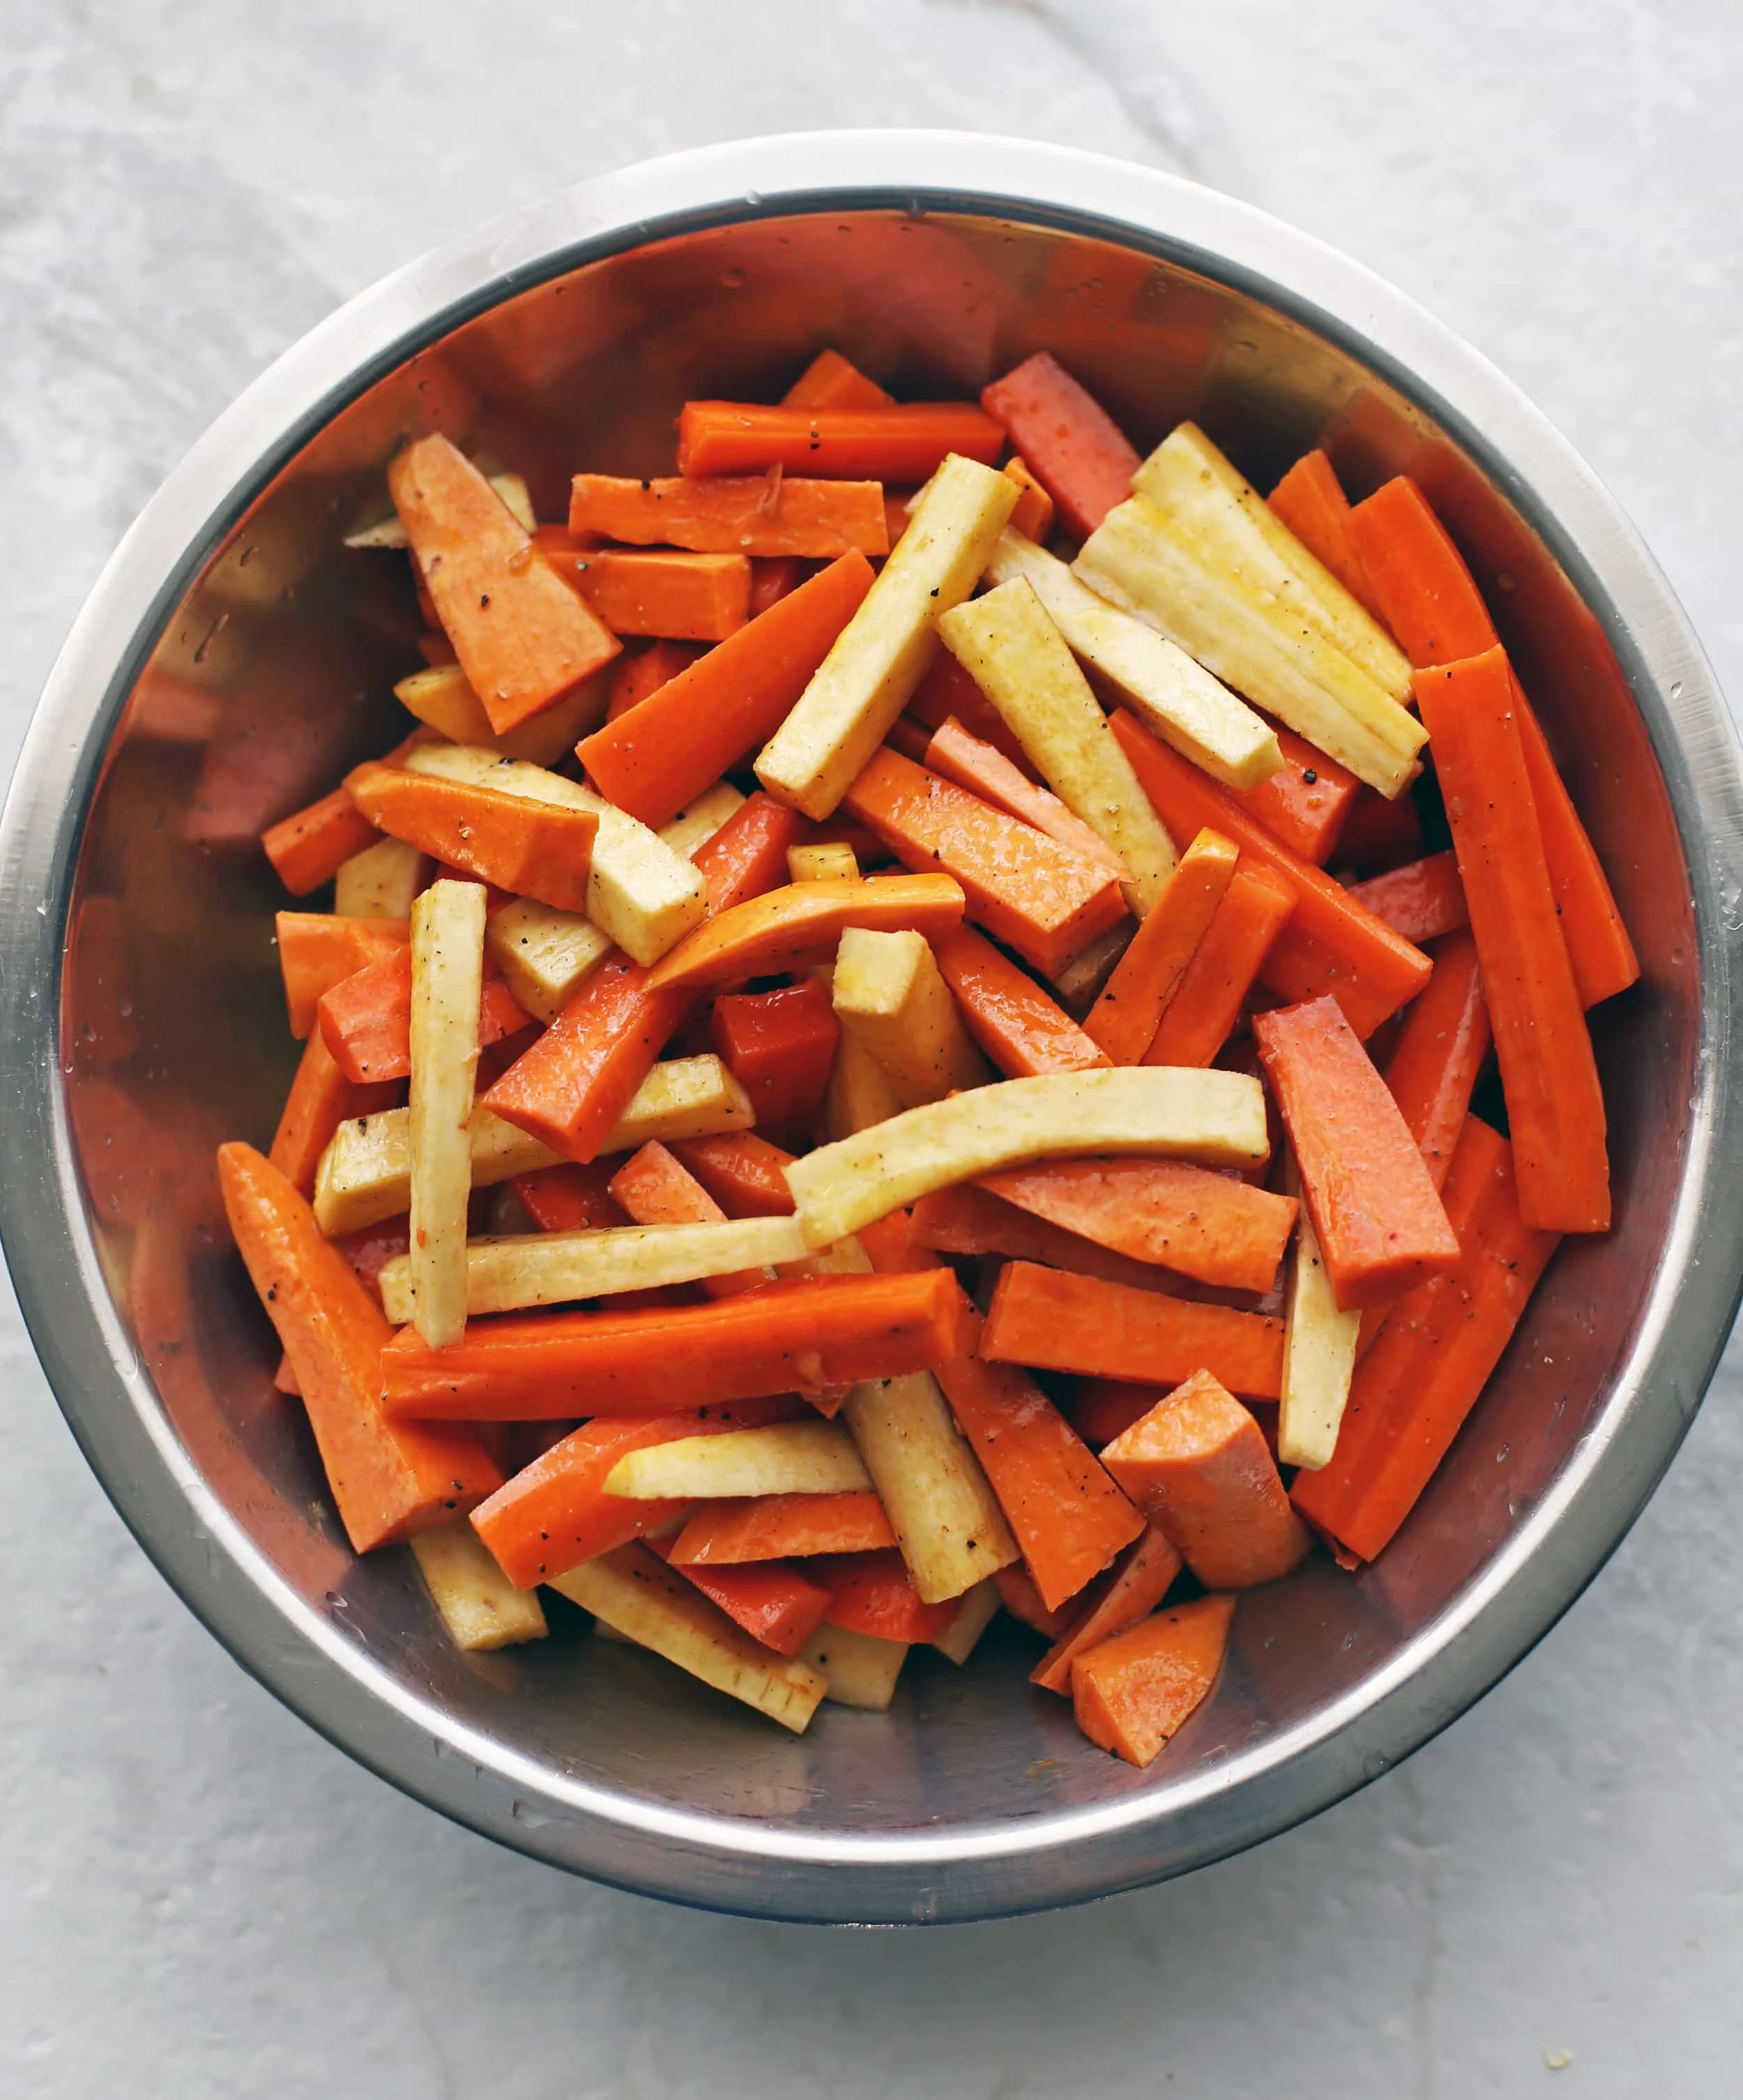 Sliced carrots, parsnips, and sweet potatoes mixed with olive oil and balsamic vinegar in a large metal bowl.